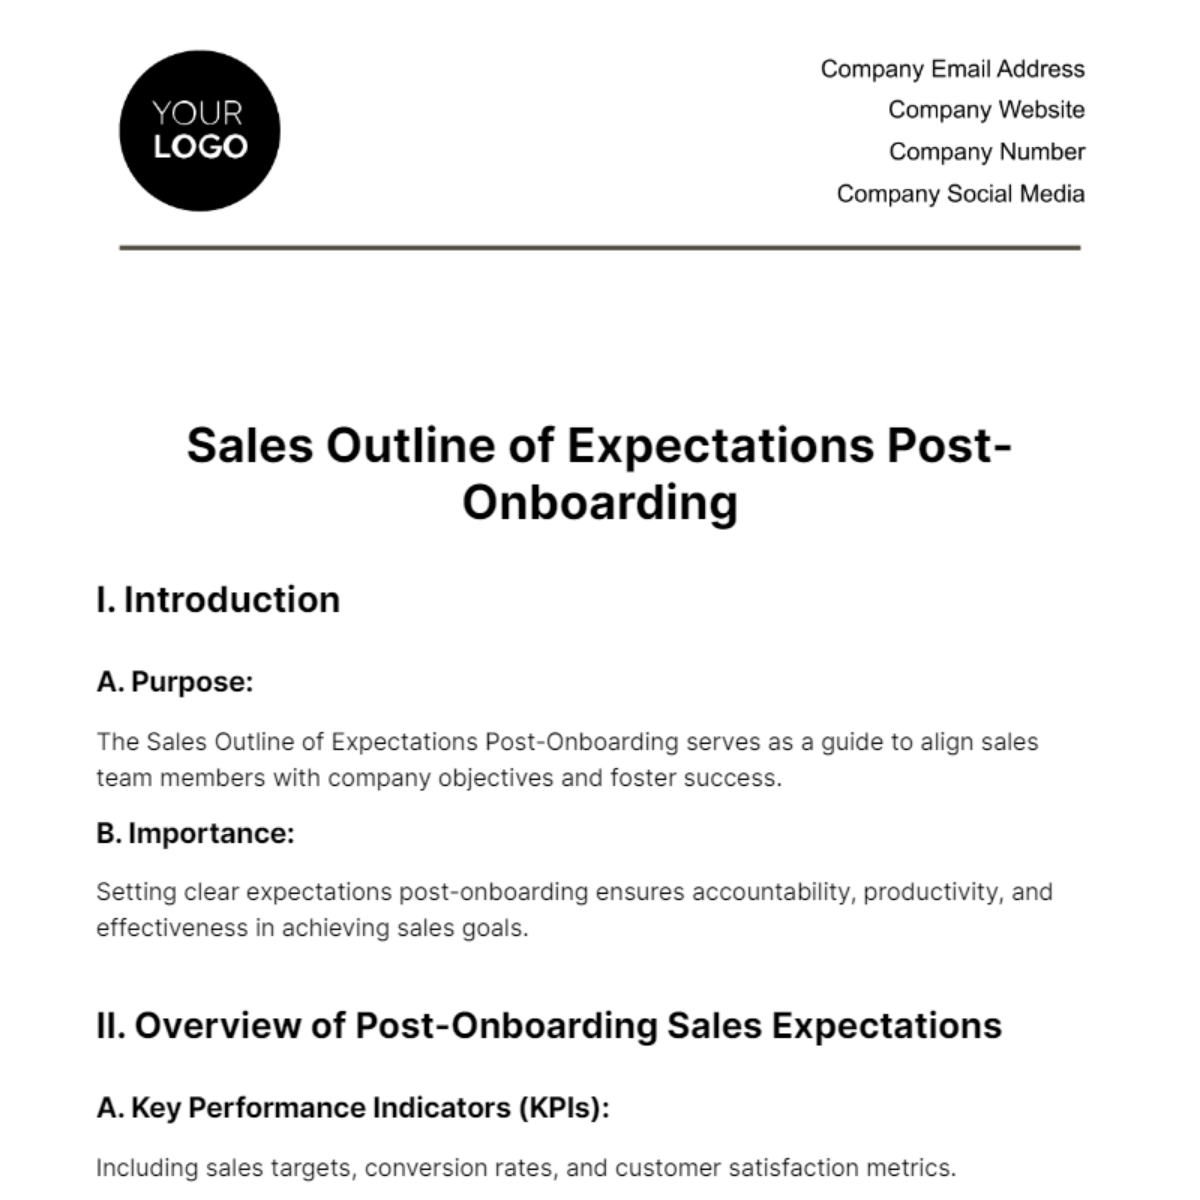 Free Sales Outline of Expectations Post-Onboarding Template